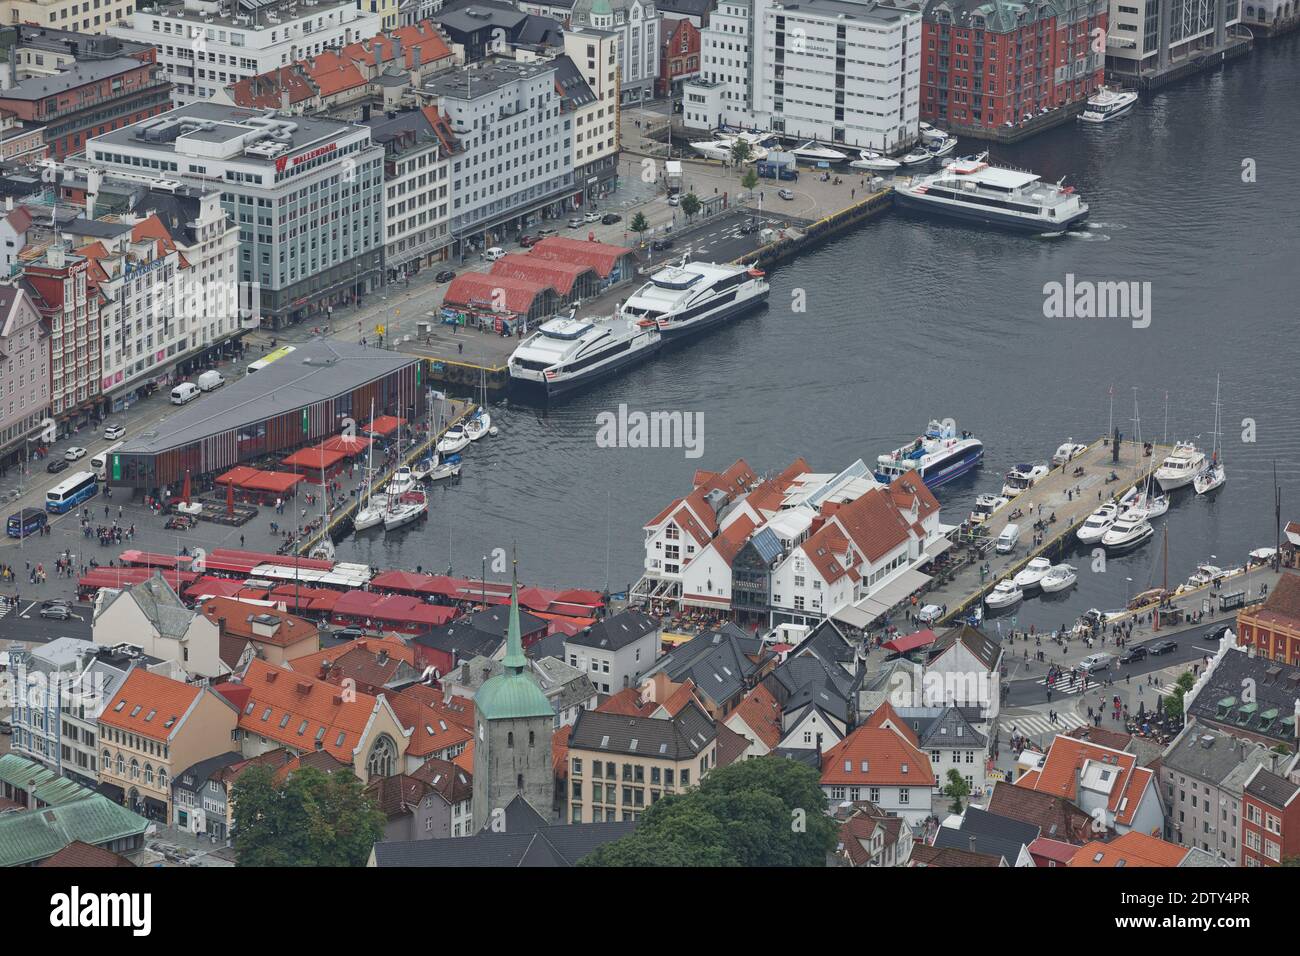 Bergen, Norway - July 18, 2017: View of Bergen city from Mount Floyen, Floyen is one of the city mountains in Bergen, Hordaland, Norway, and one of th Stock Photo